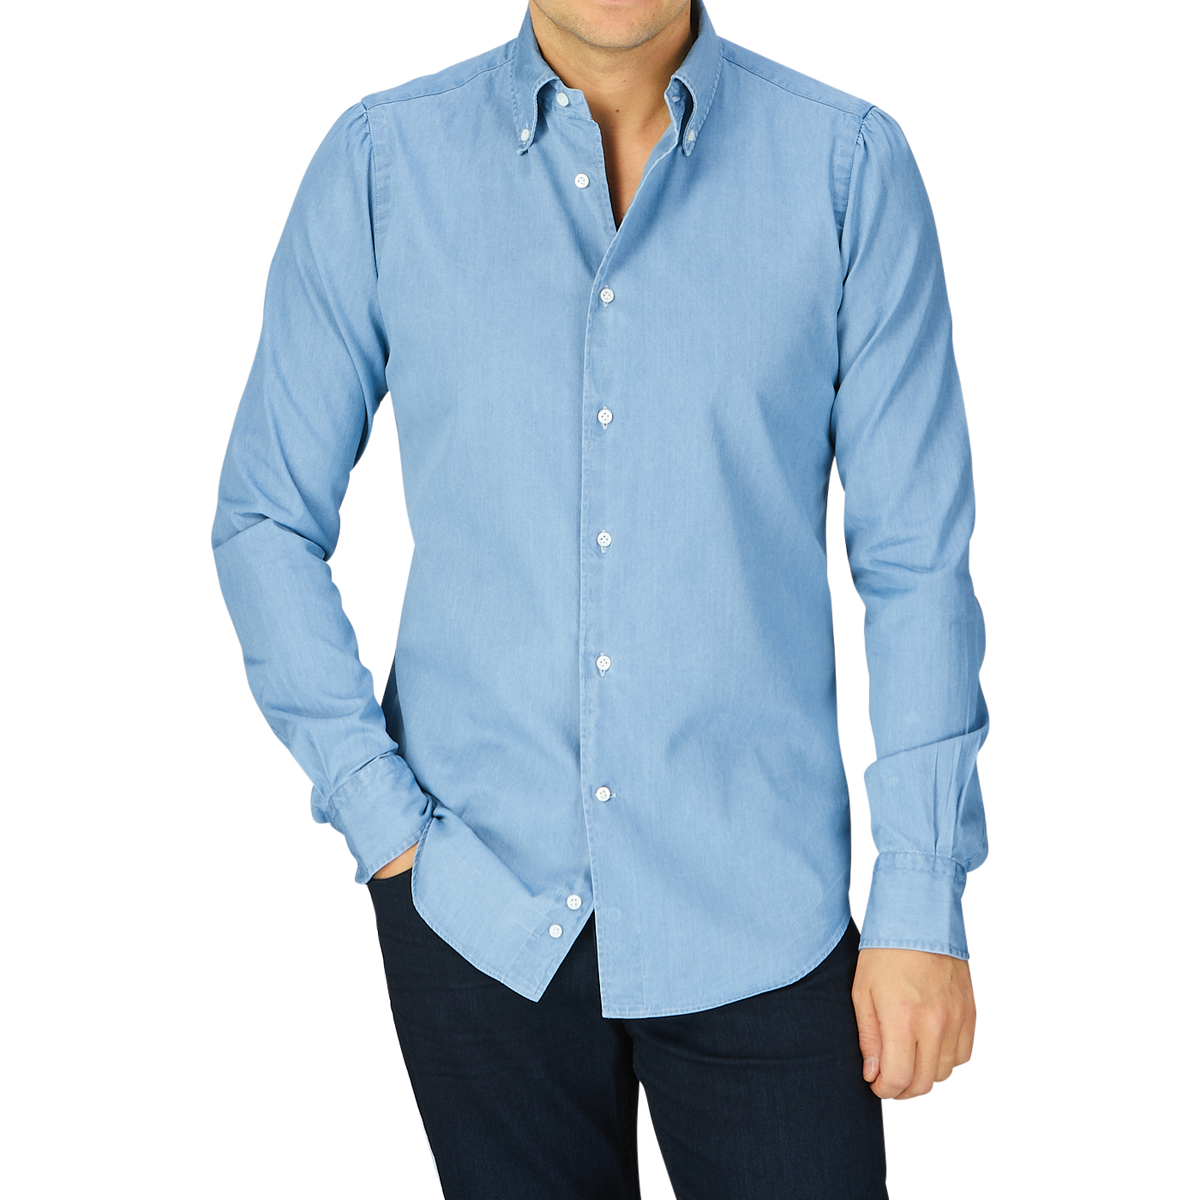 A man wearing a Mazzarelli Light Blue Washed Denim BD Slim Shirt and dark pants against a grey background.